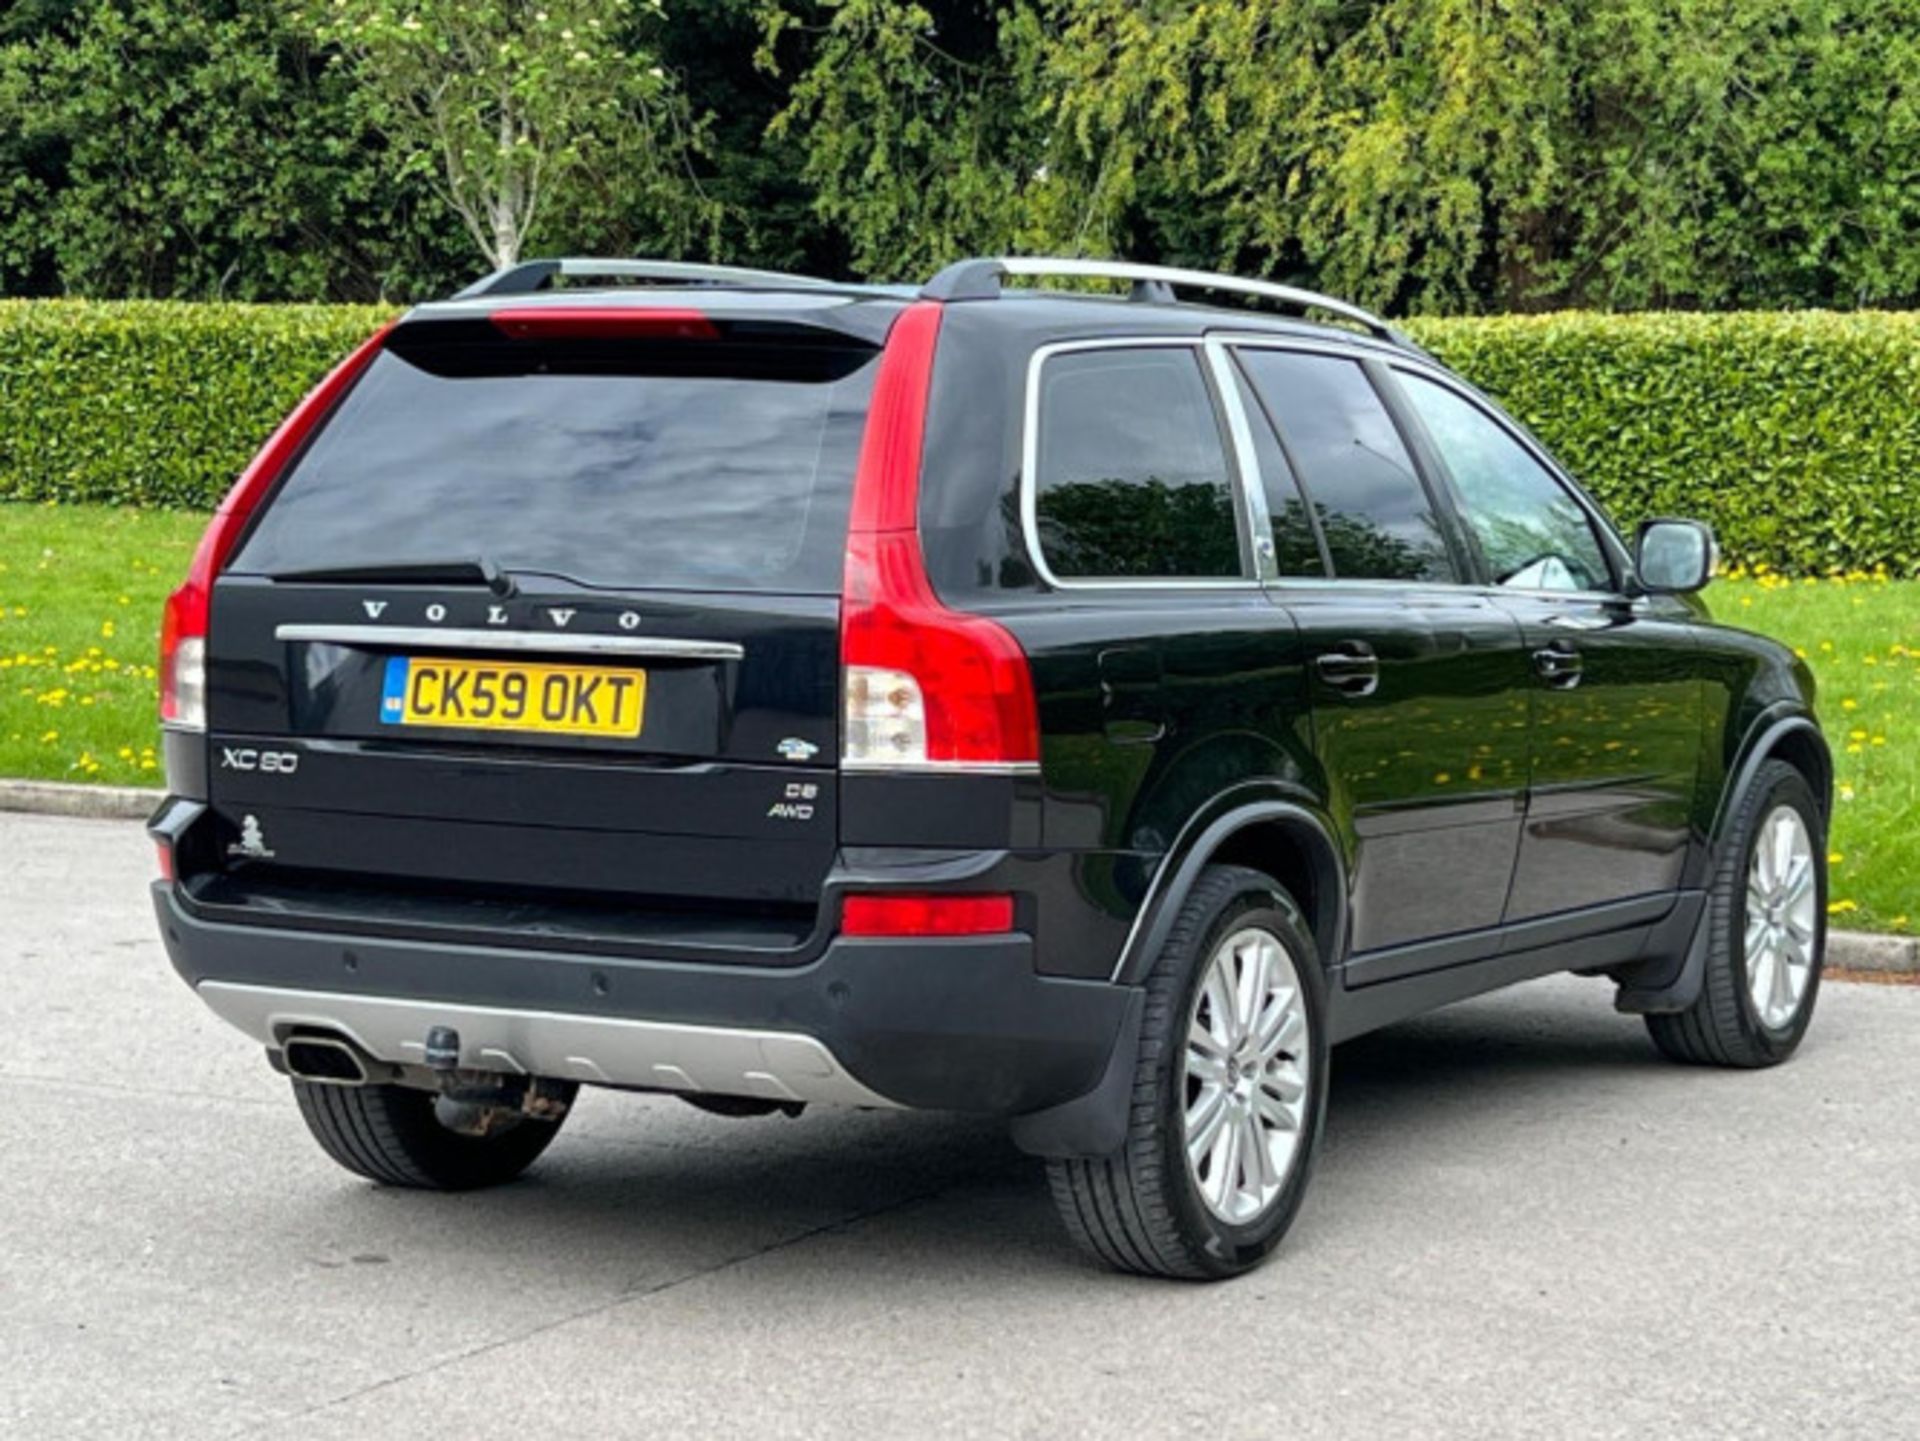 VOLVO XC90 2.4 D5 EXECUTIVE GEARTRONIC AWD, 5DR >>--NO VAT ON HAMMER--<< - Image 7 of 136